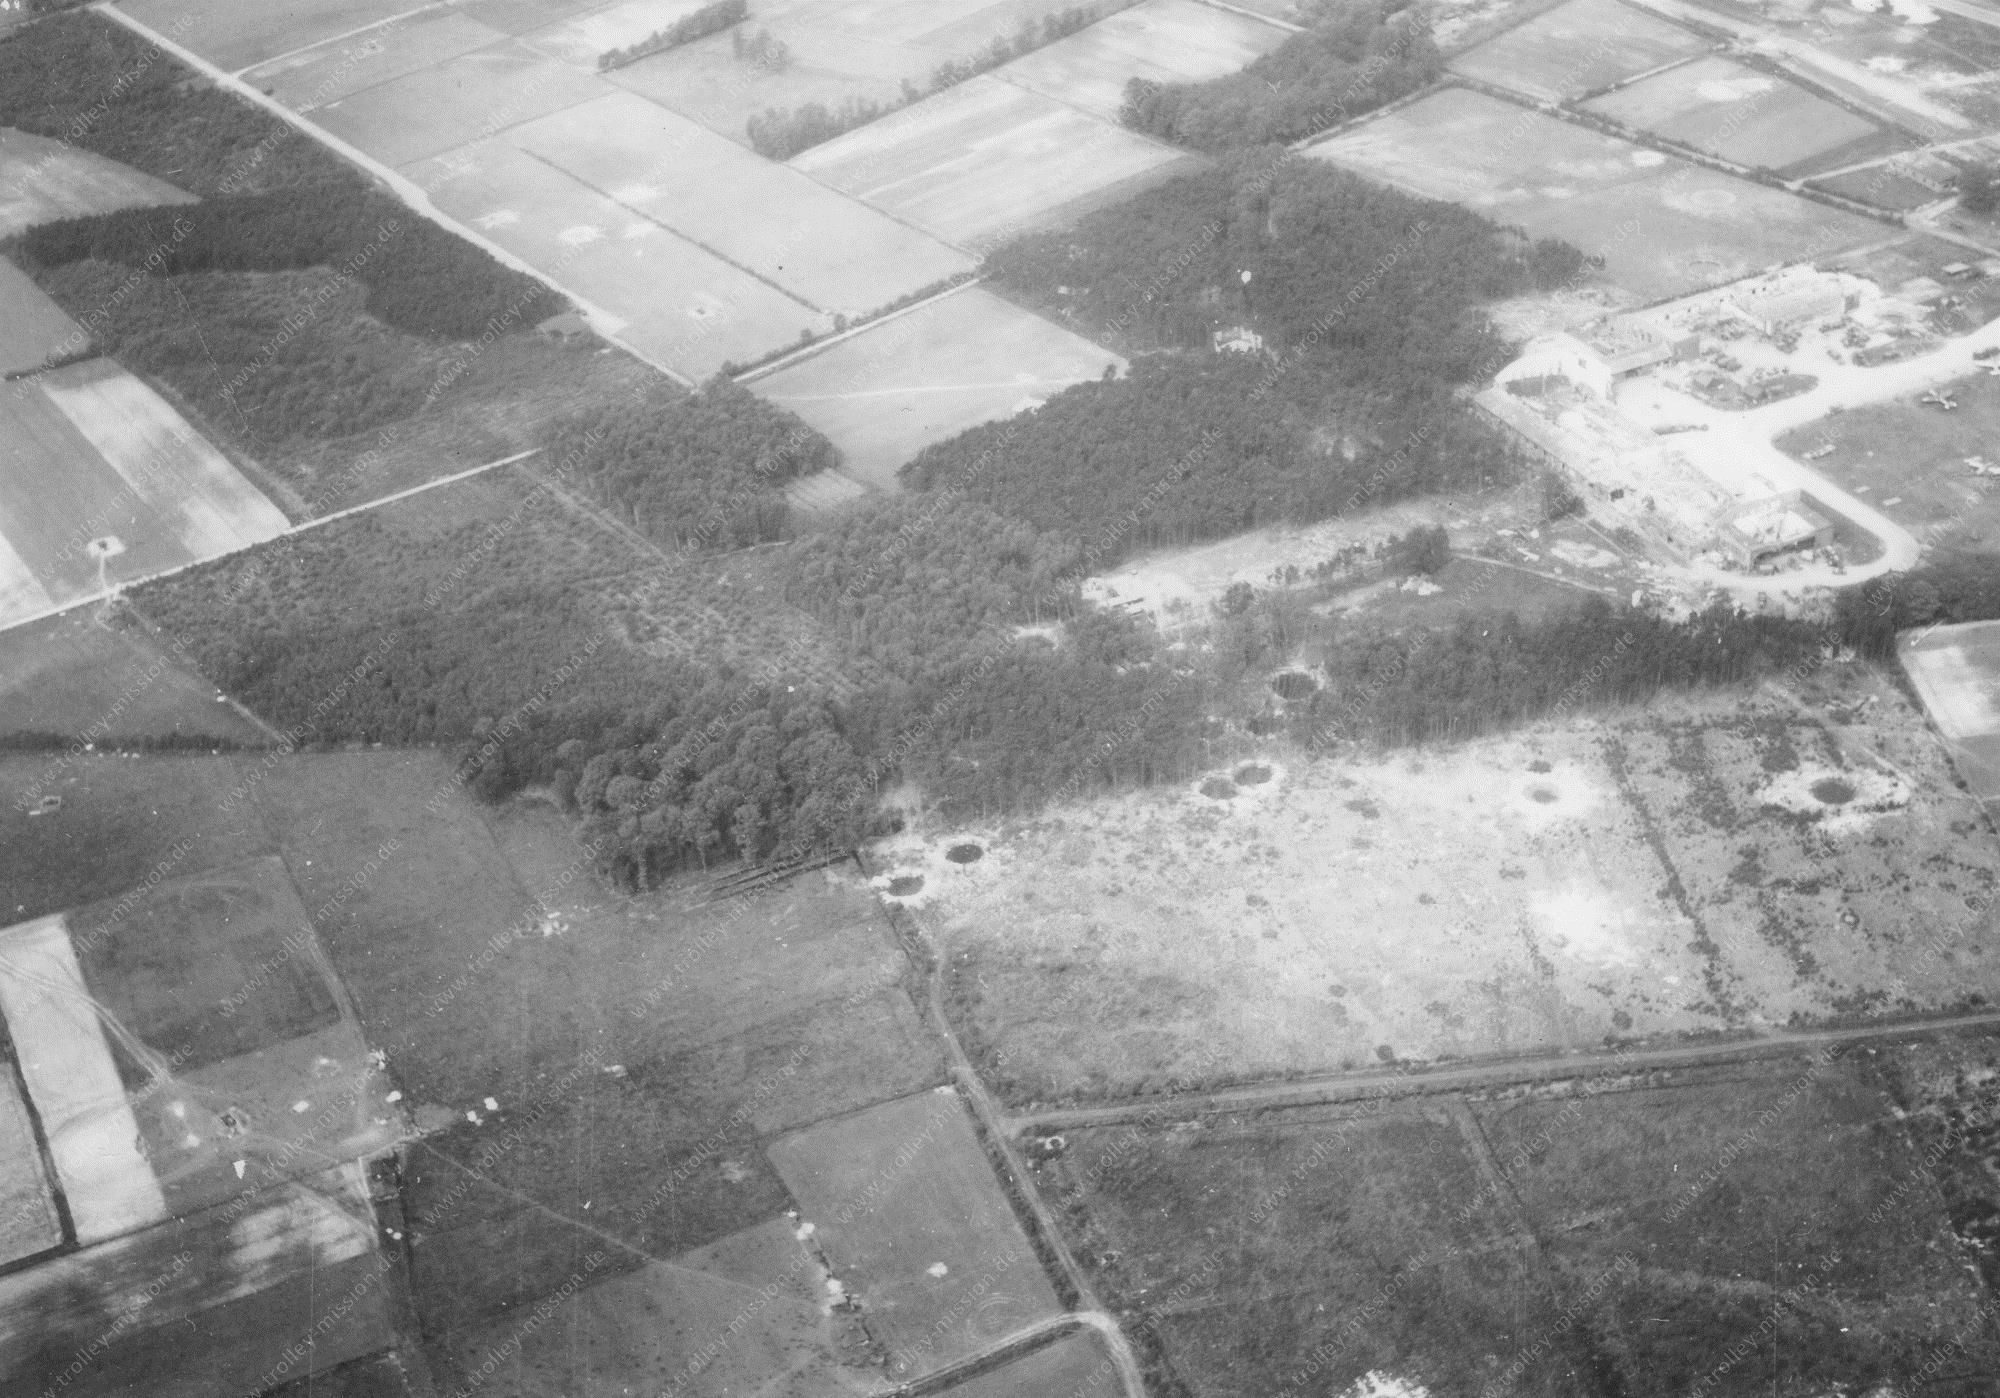 Muenster from above: Aerial view after Allied air raids in World War II